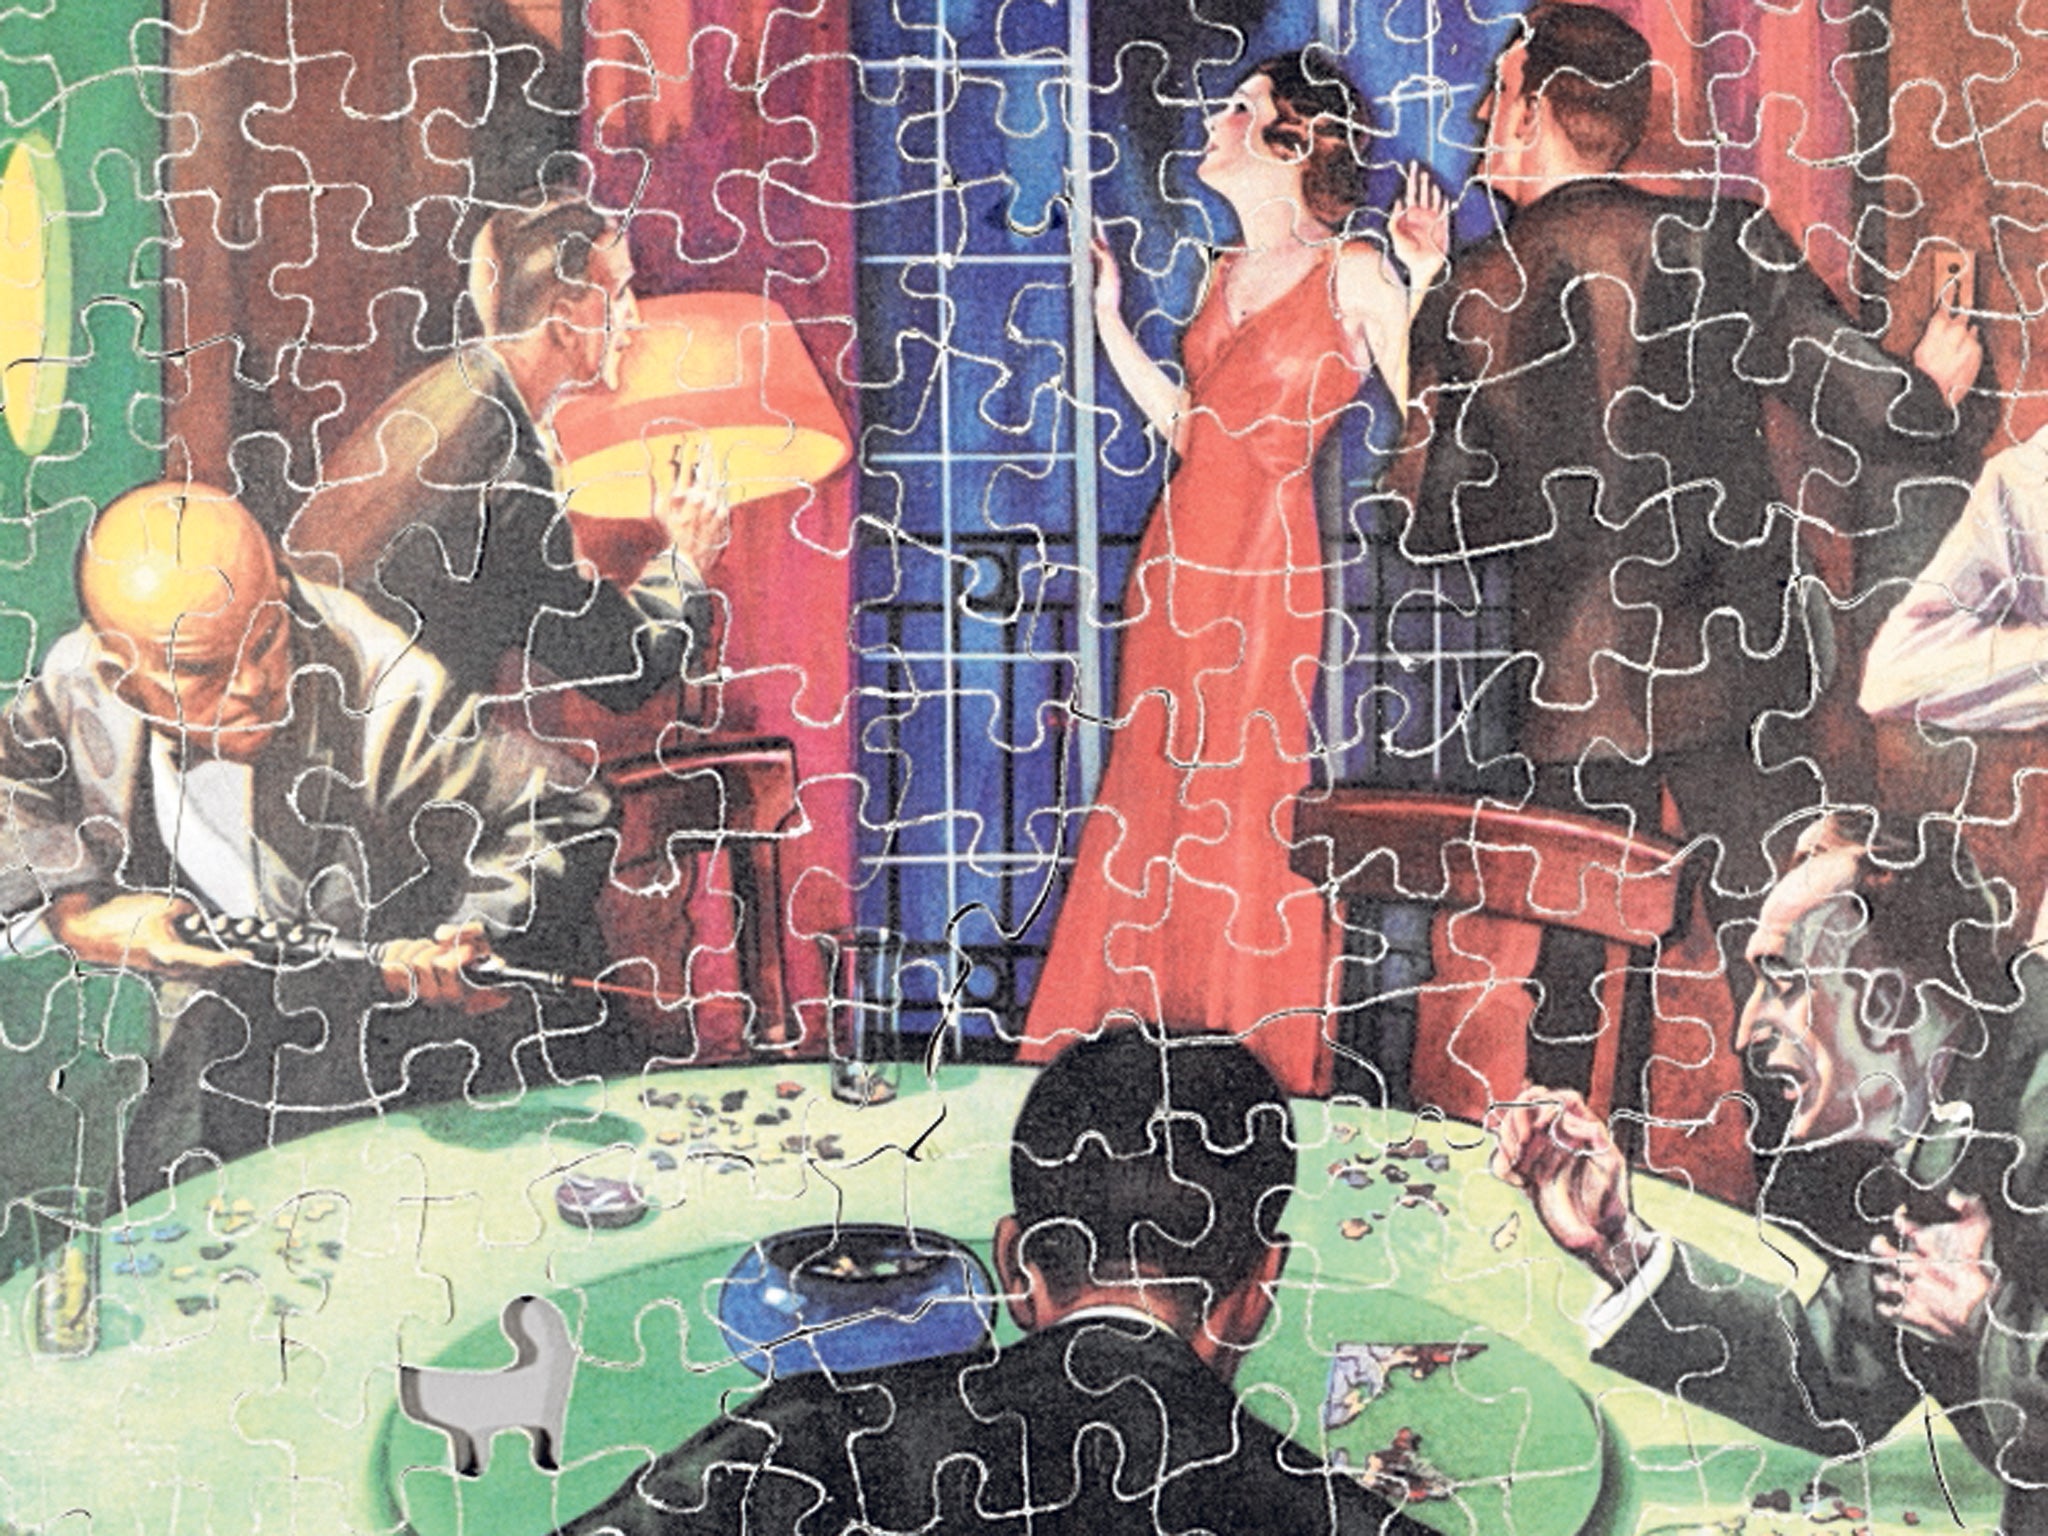 Thrilled to pieces: 'The Jigsaw Puzzle Murder' by Walter Eberhardt